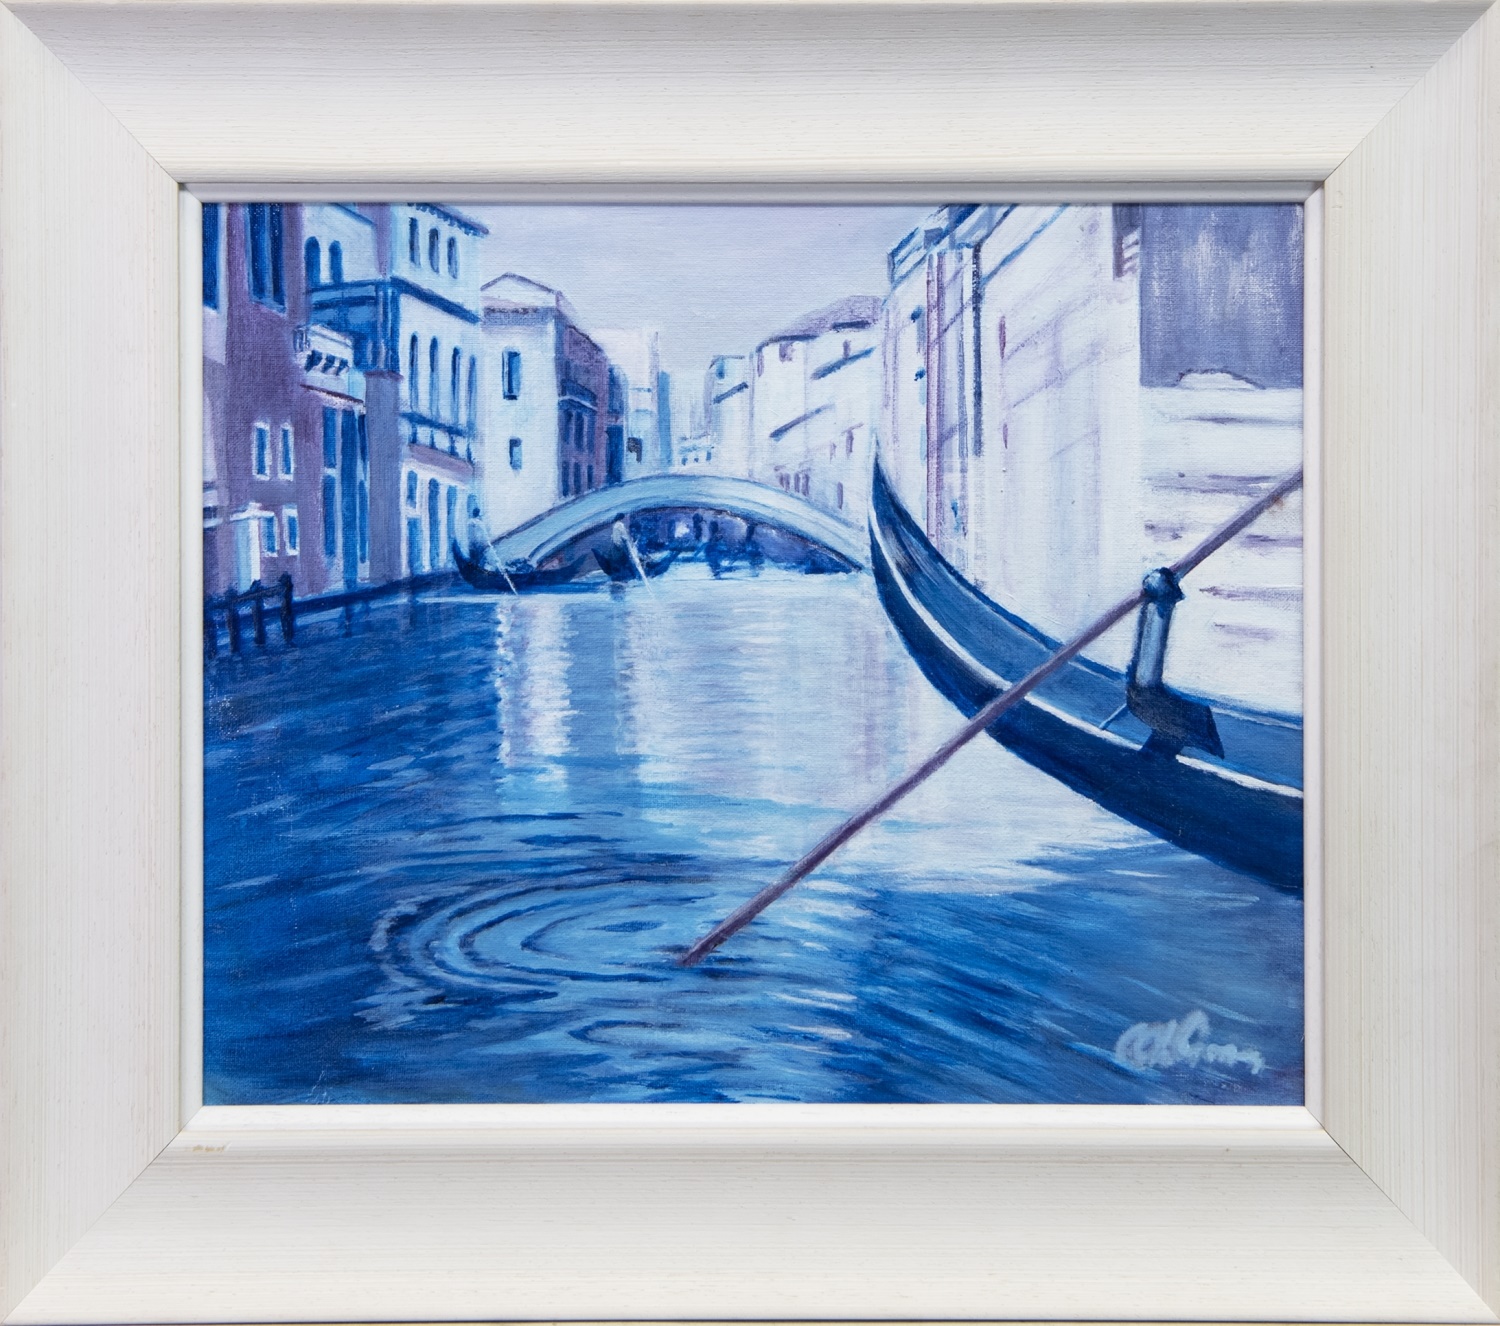 VENITIAN REFLECTIONS, AN ACRYLIC BY ALICK GRAY